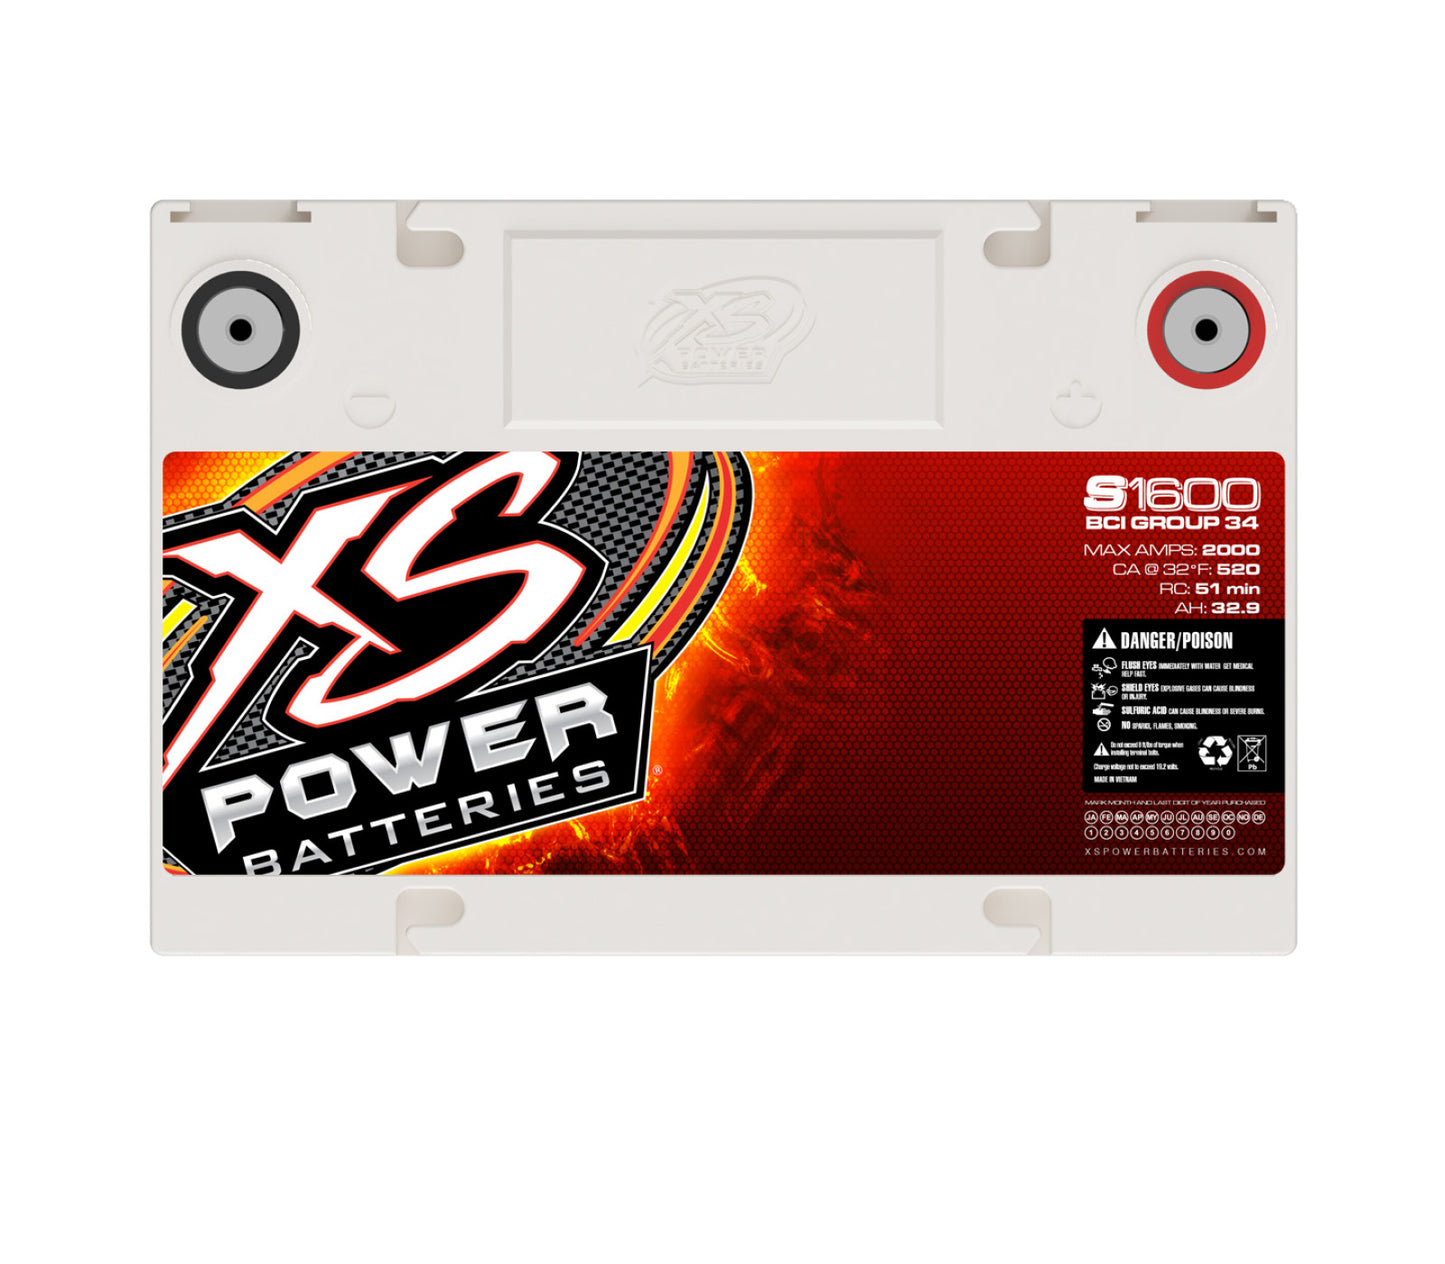 XS Power Batteries 16V AGM Batteries - 3/8" Stud Terminals Included 2000 Max Amps